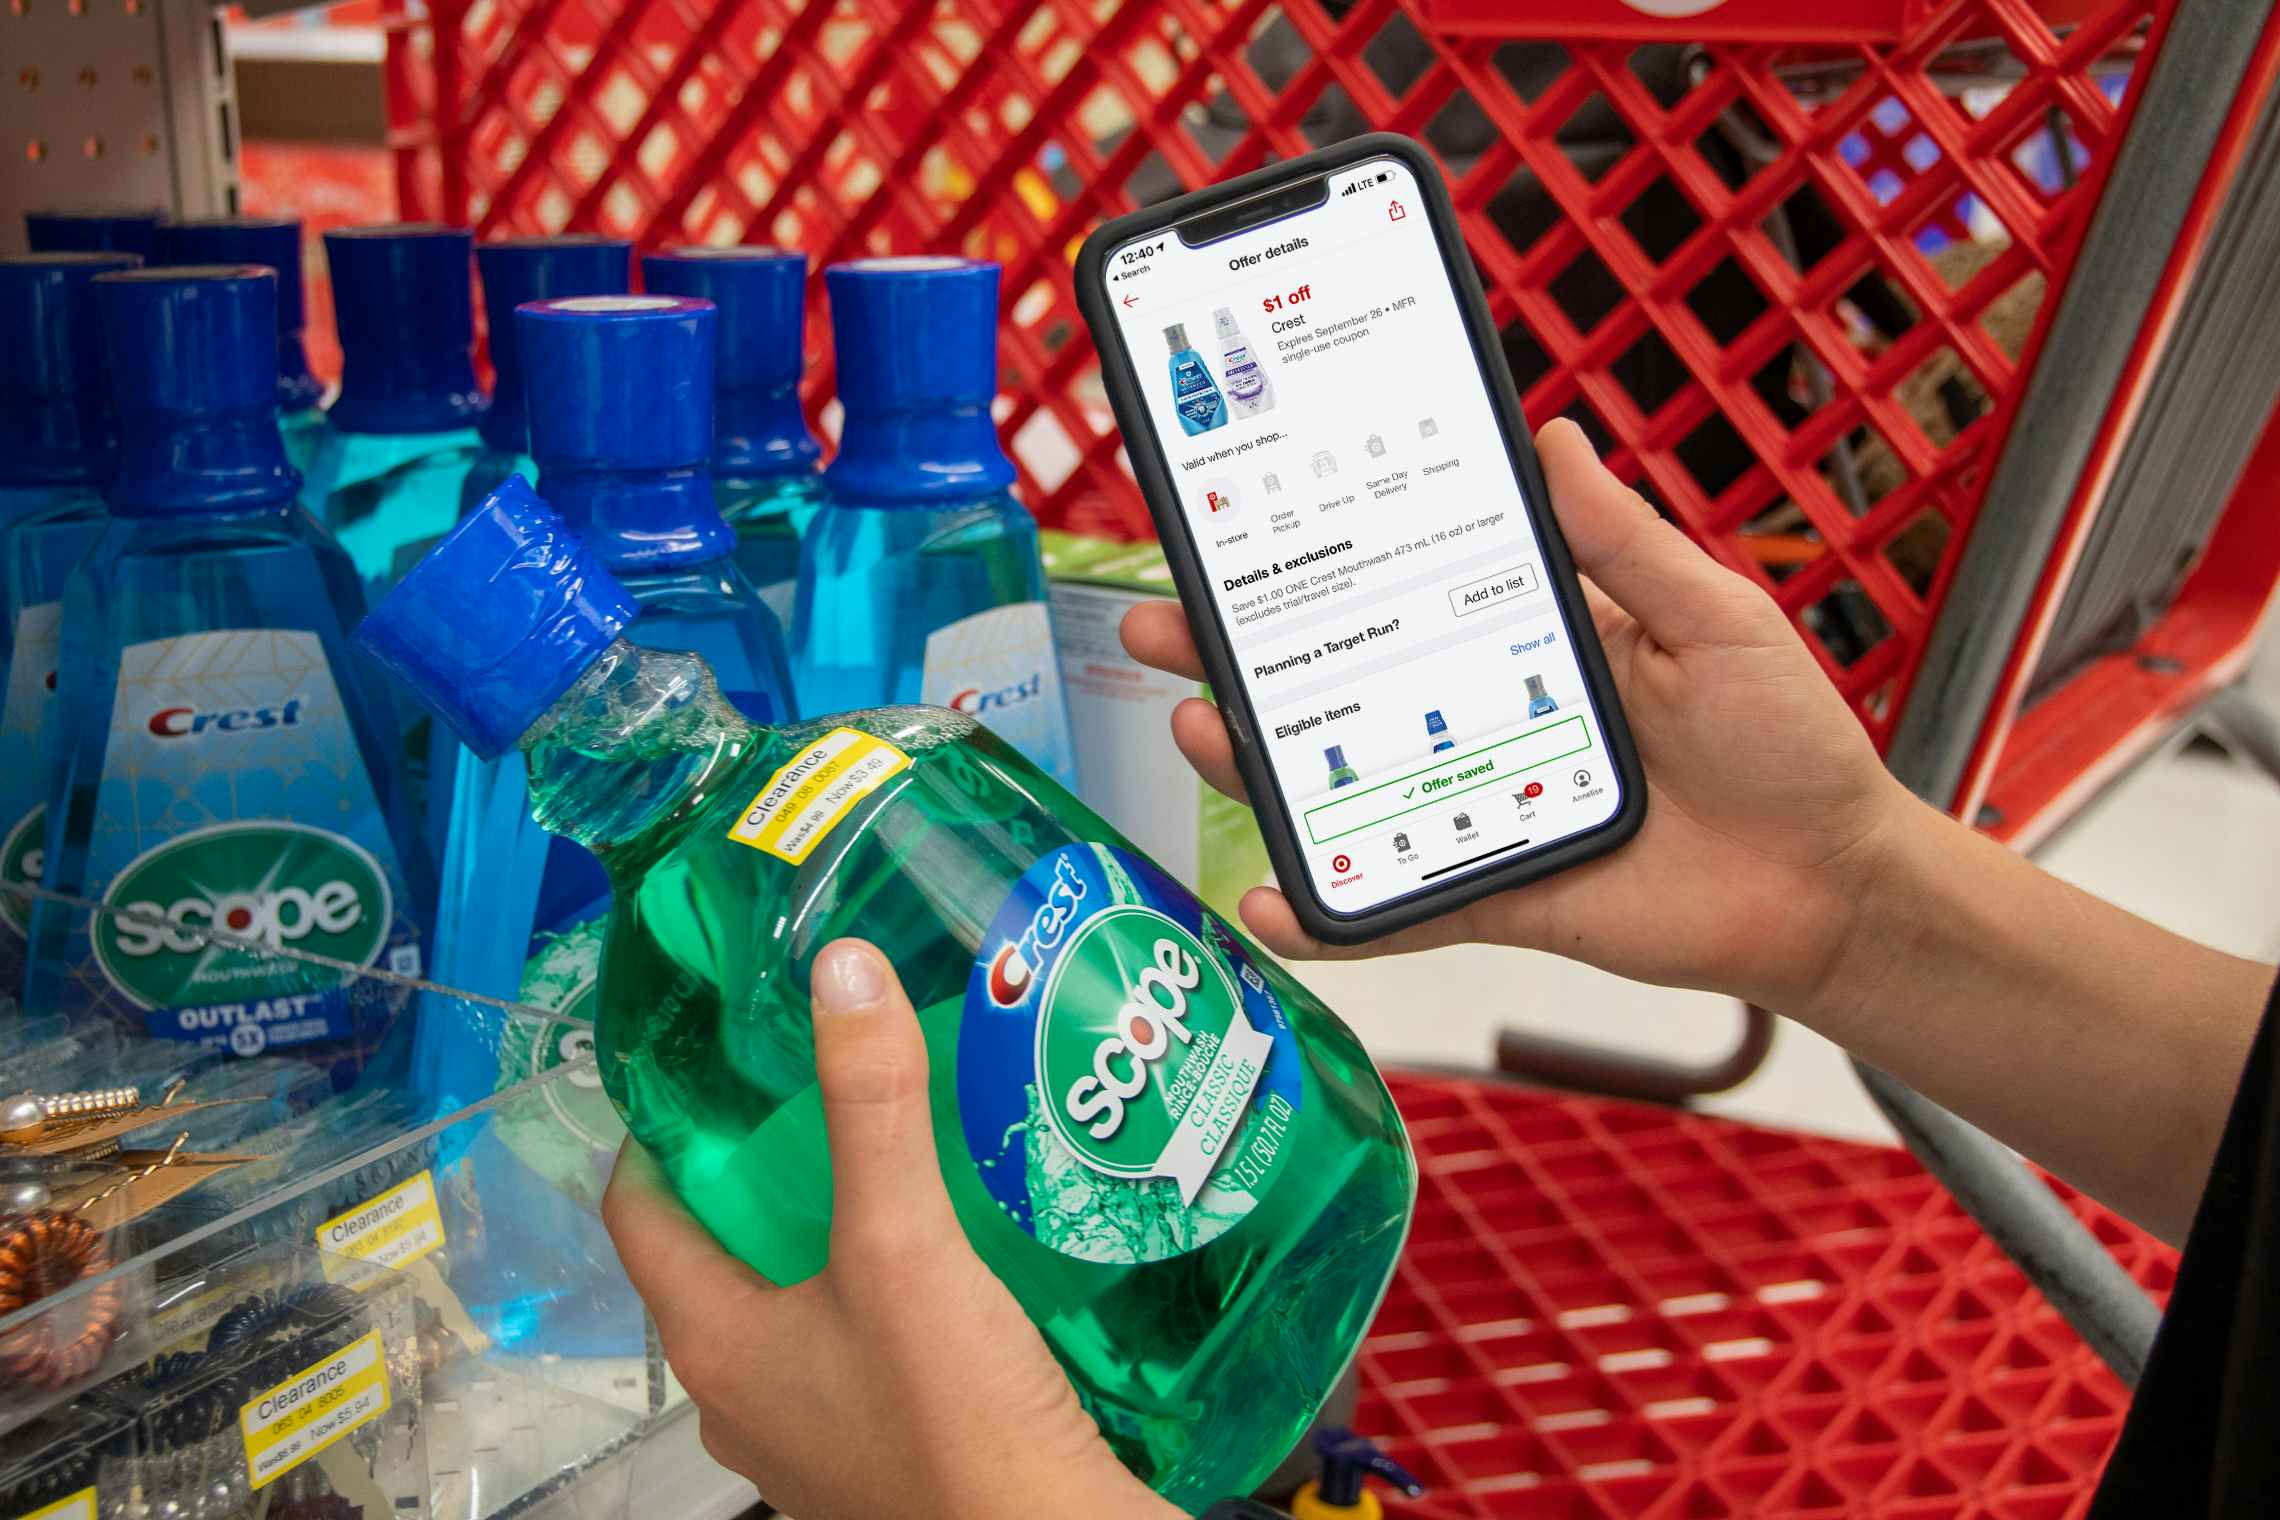 A person holding their phone displaying a Target circle app coupon next to a bottle of Scope mouthwash with a clearance sticker in Target...